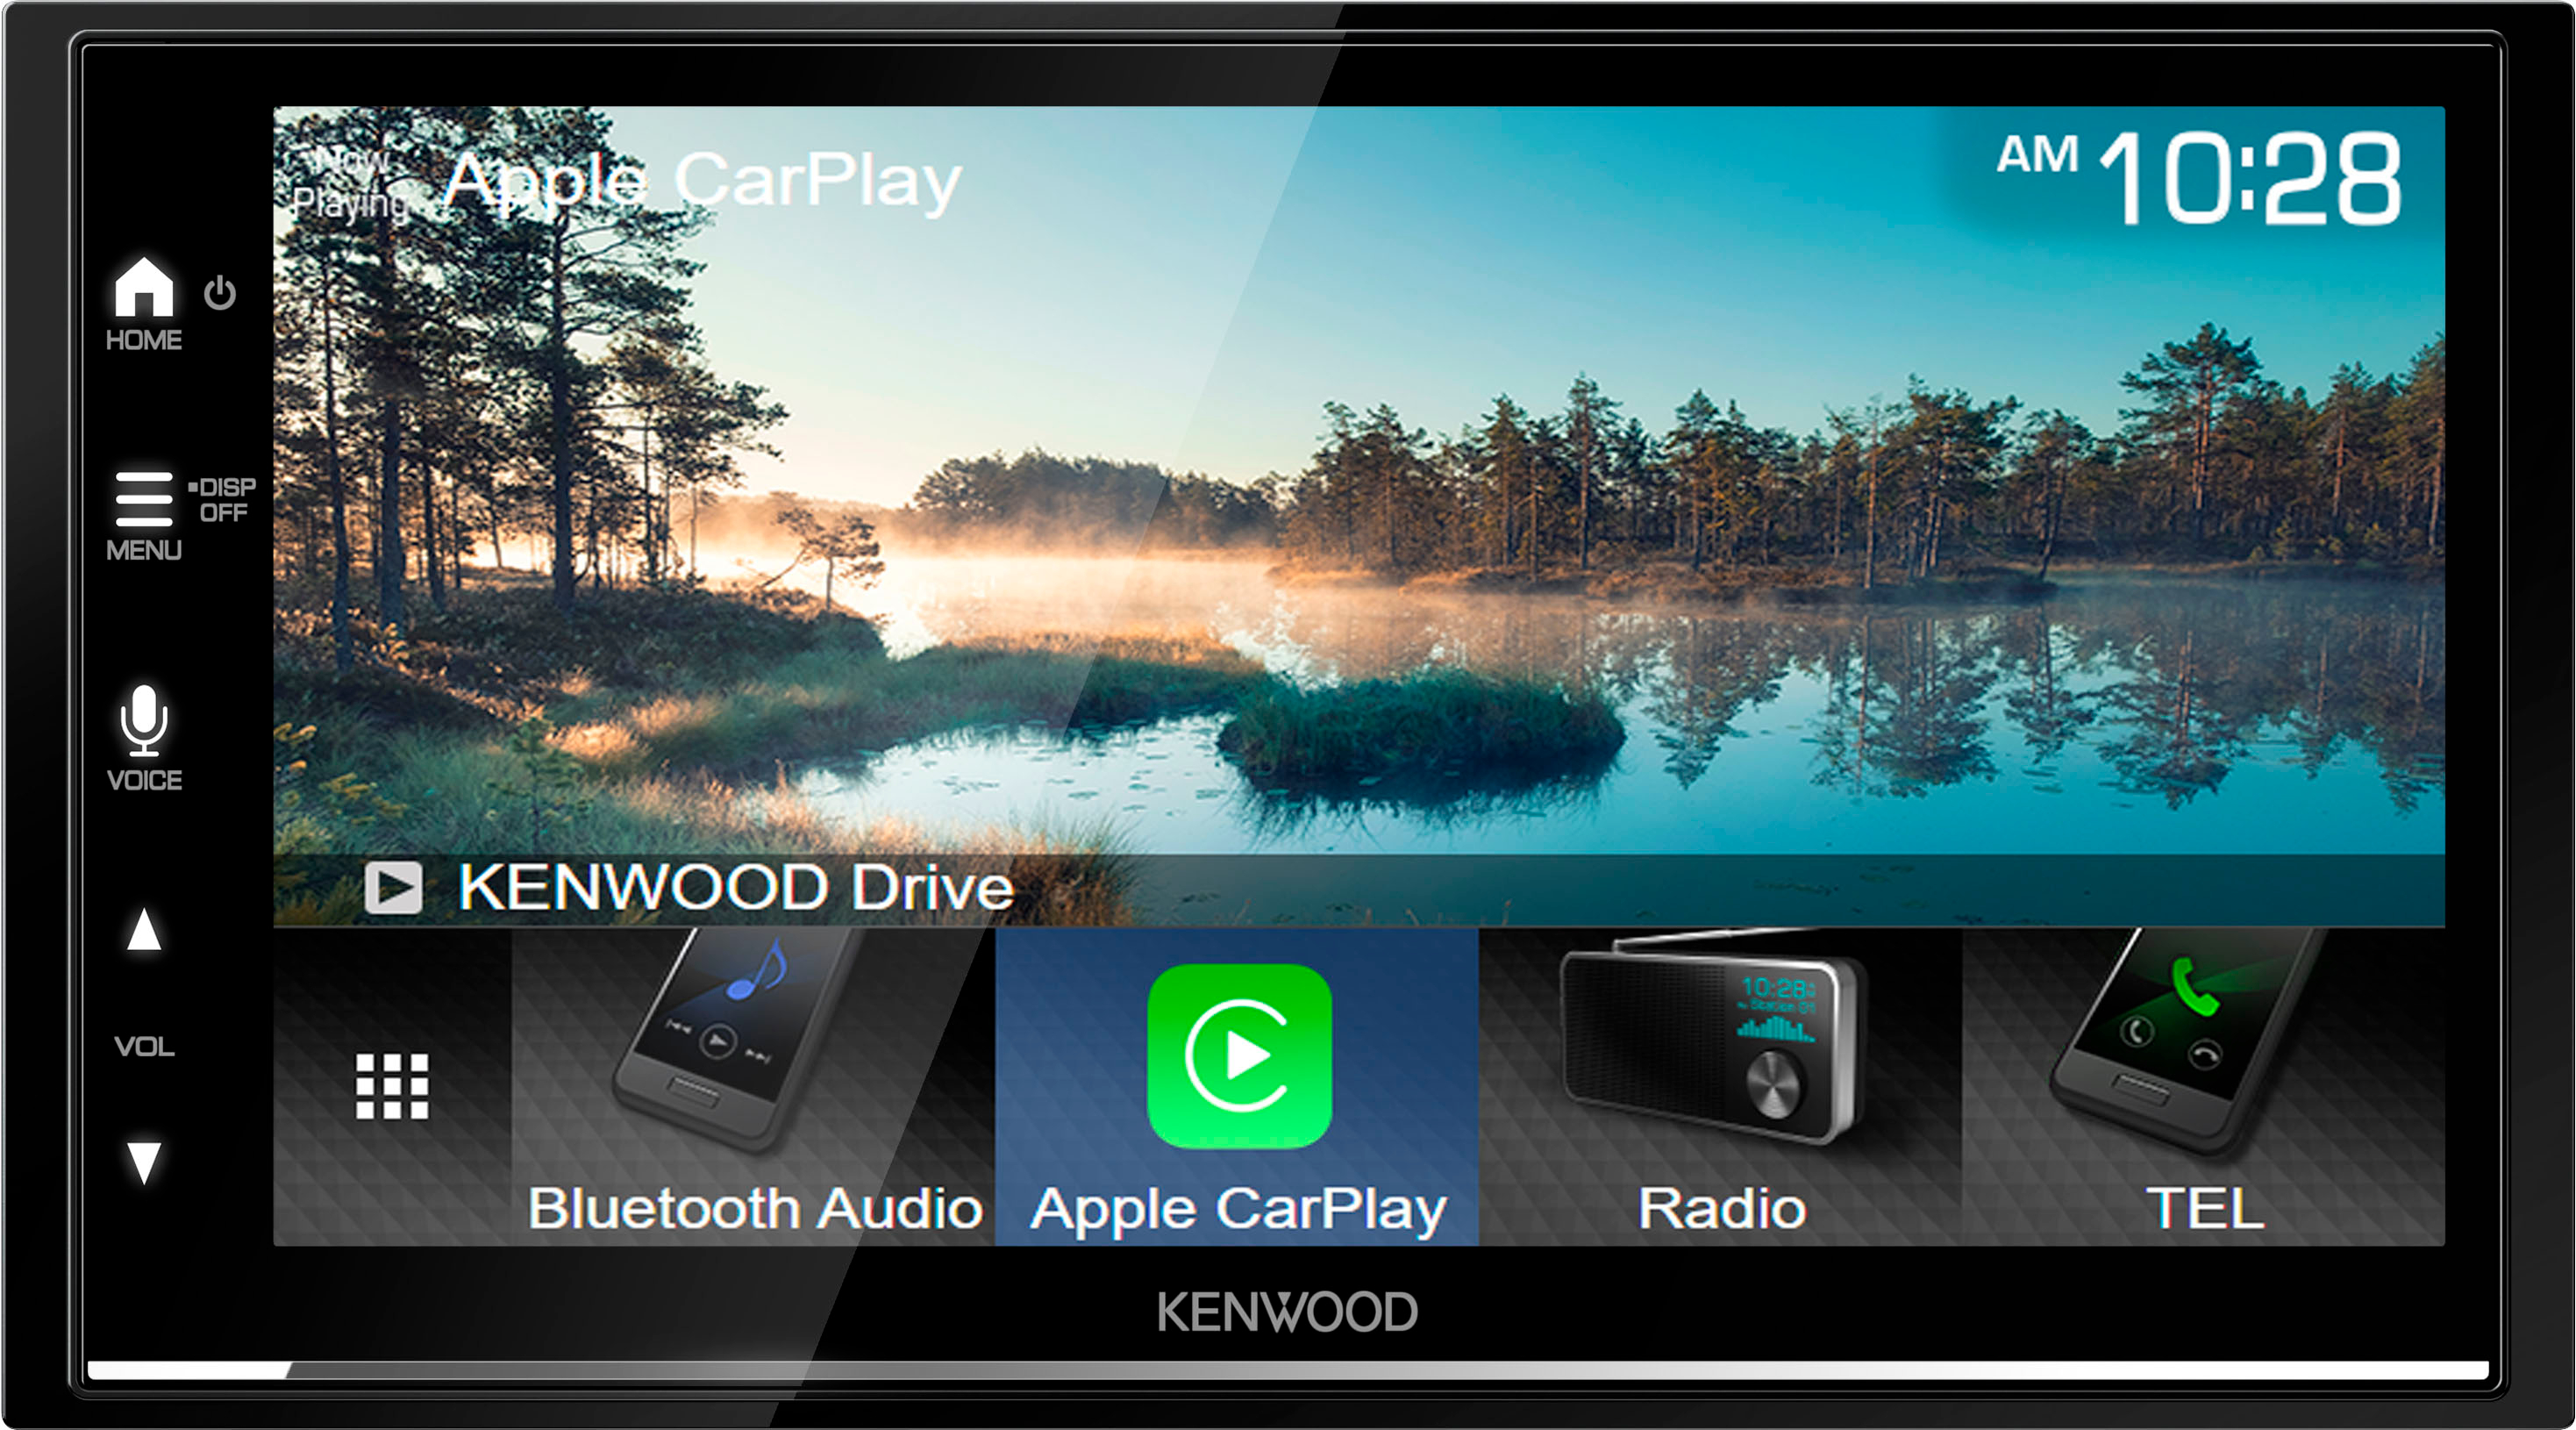 Kenwood - 6.8" Android Auto and Apple CarPlay Bluetooth Digital Media (DM) Receiver and Maestro Ready - Black